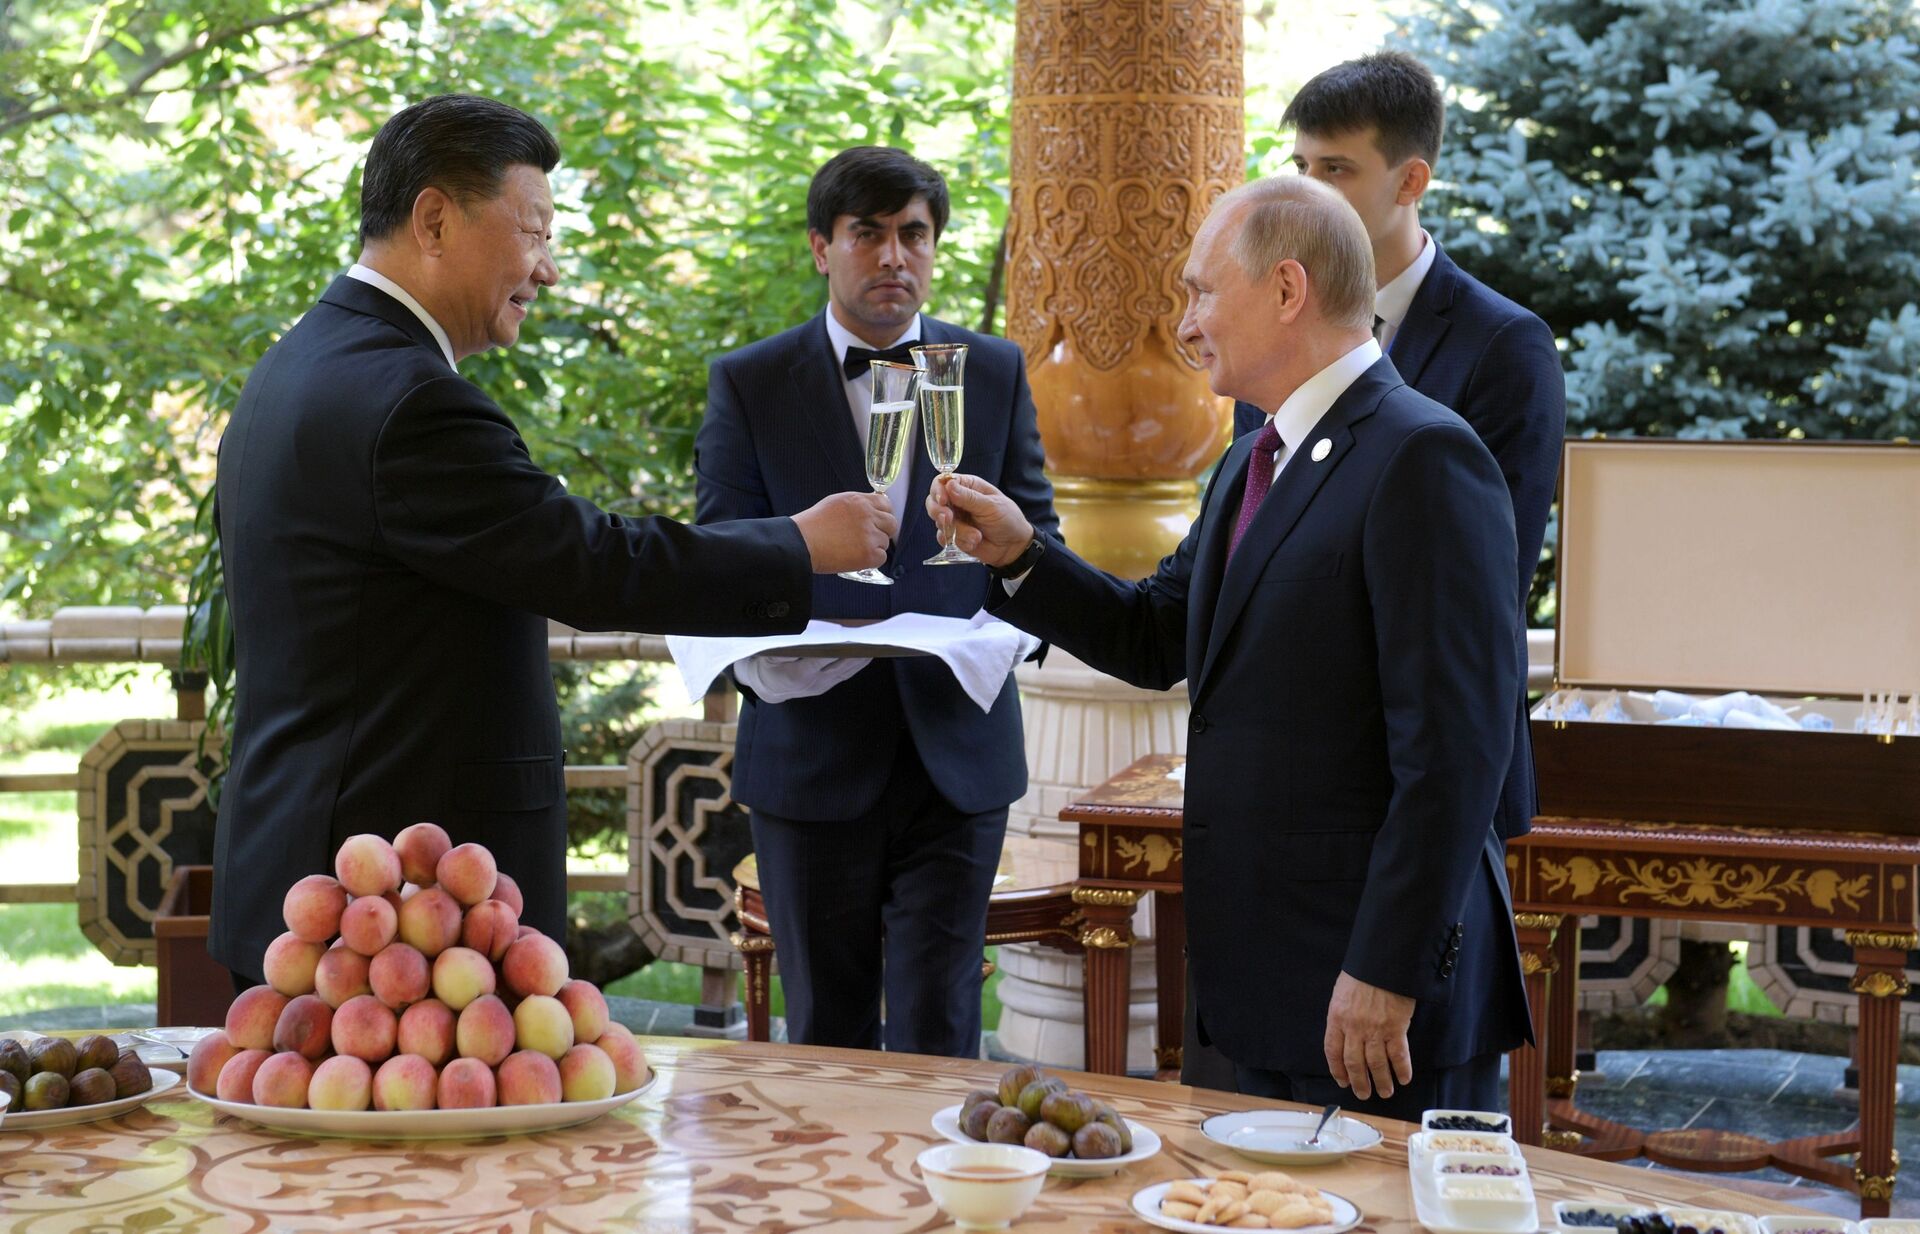 Russian President Vladimir Putin Gives Birthday Present to Chinese President Xi Jinping during the Conference on Interaction and Confidence-Building Measures in Asia - Sputnik International, 1920, 03.02.2022